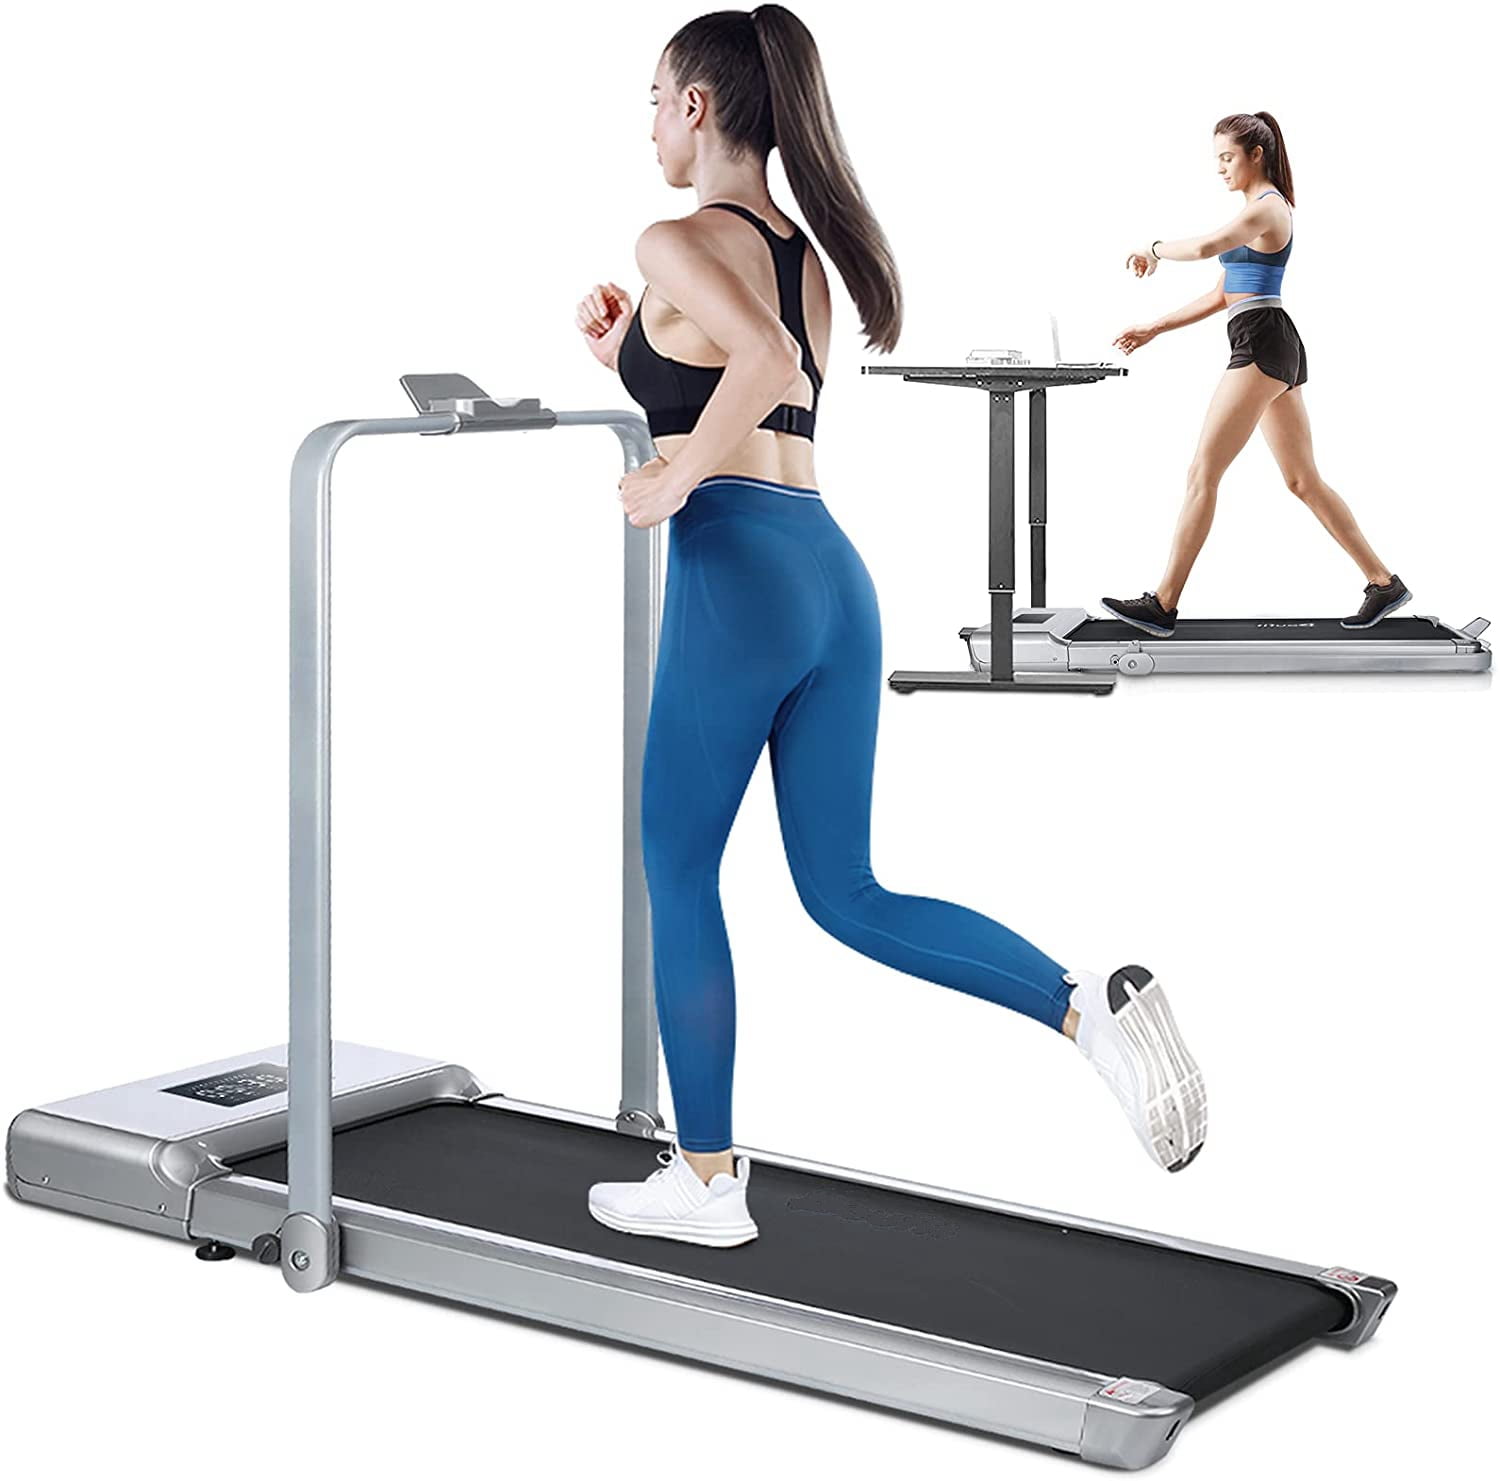 UMAY Portable Treadmill with Foldable Wheels Sports App Under Desk Walking Pad Flat Slim Treadmill Jogging Running Machine for Home/Office Installation-Free Remote Control 